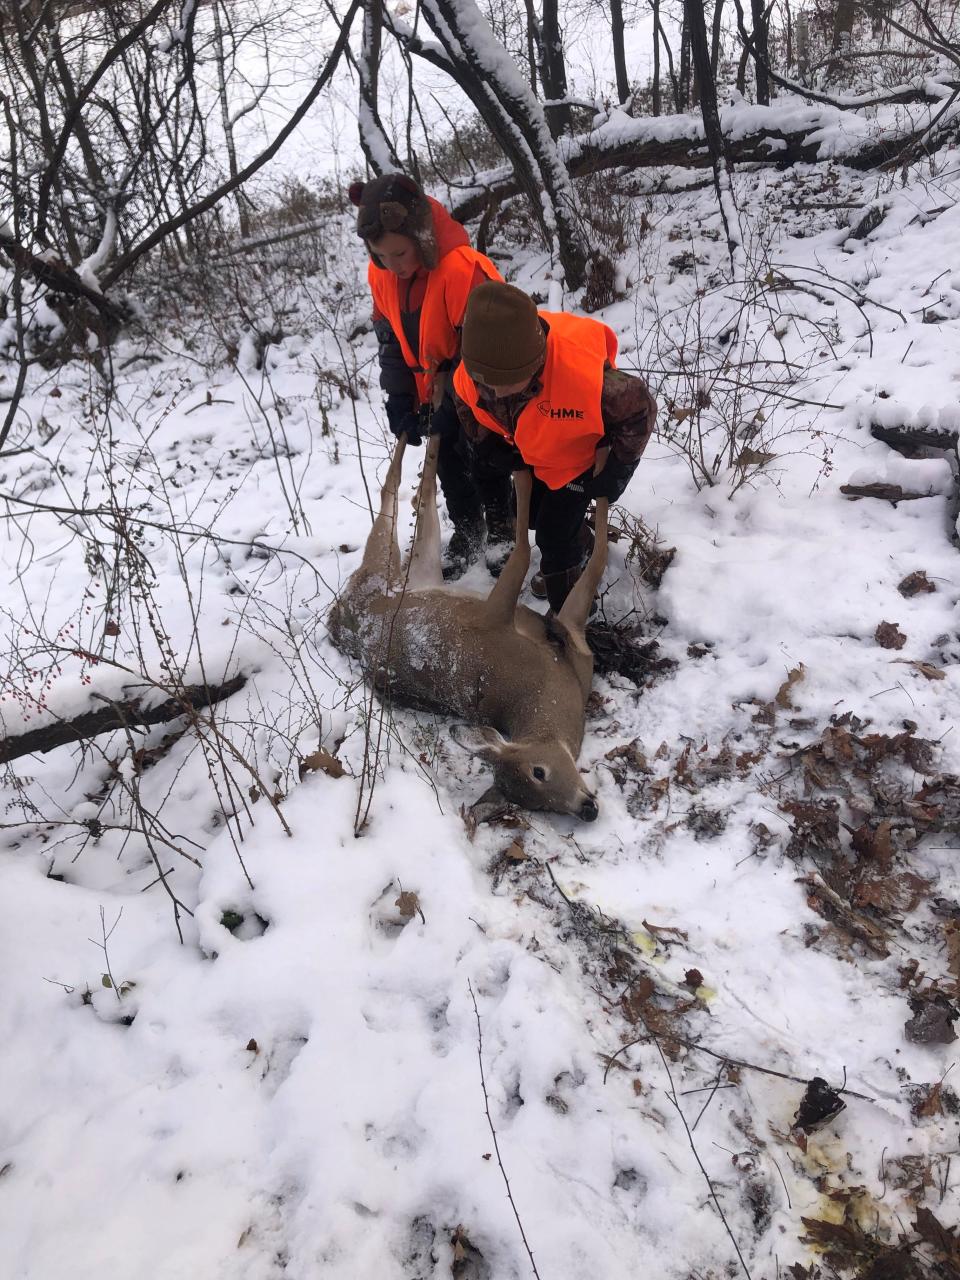 Roman and Paxton Wood dragging the first deer they saw harvested last year. The boys spotted the deer before their uncle, Brian Reisinger, and helped him find the doe and bring it home.